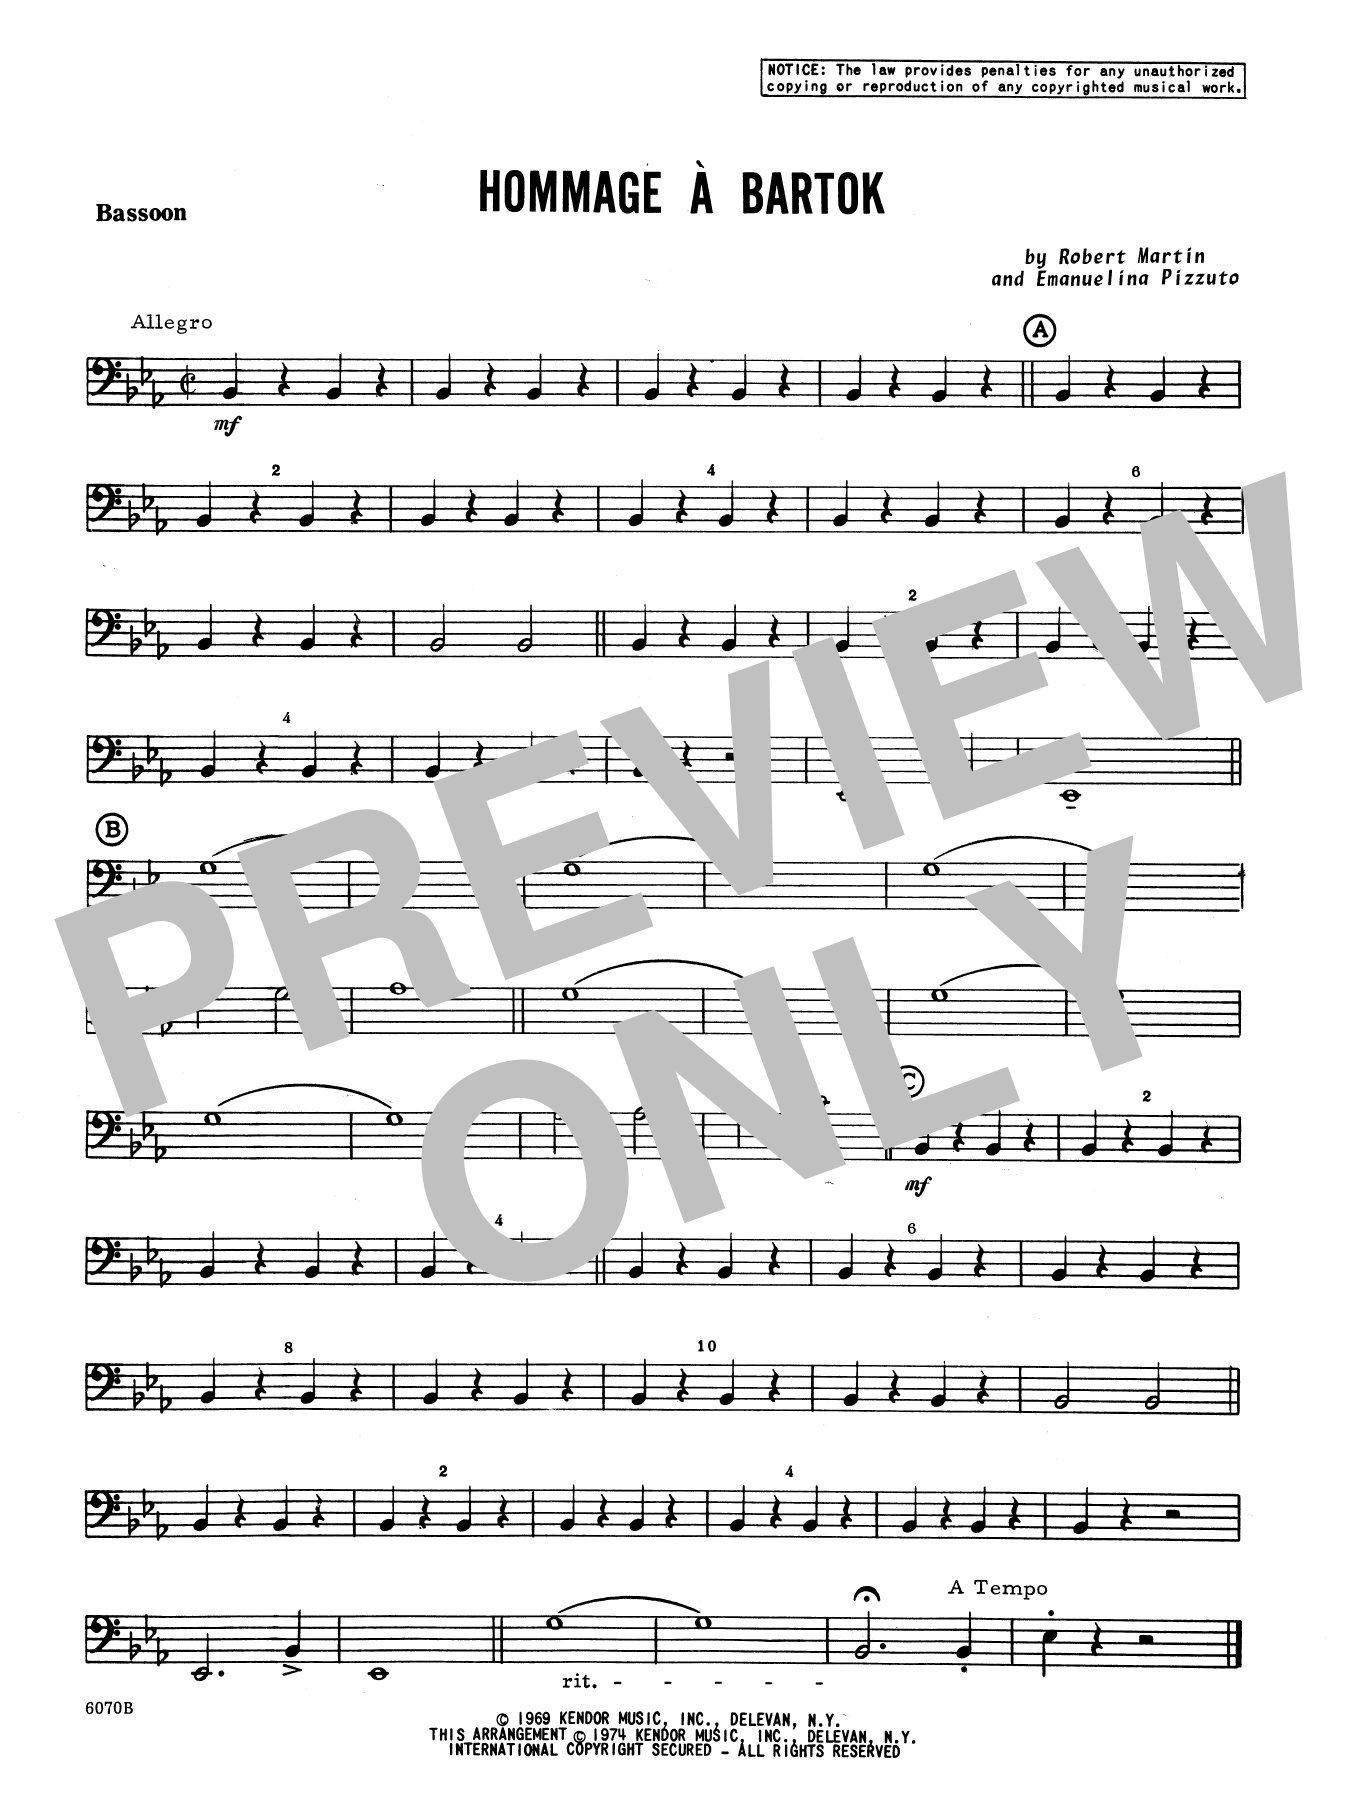 Martin Hommage A Bartok - Bassoon sheet music notes and chords. Download Printable PDF.